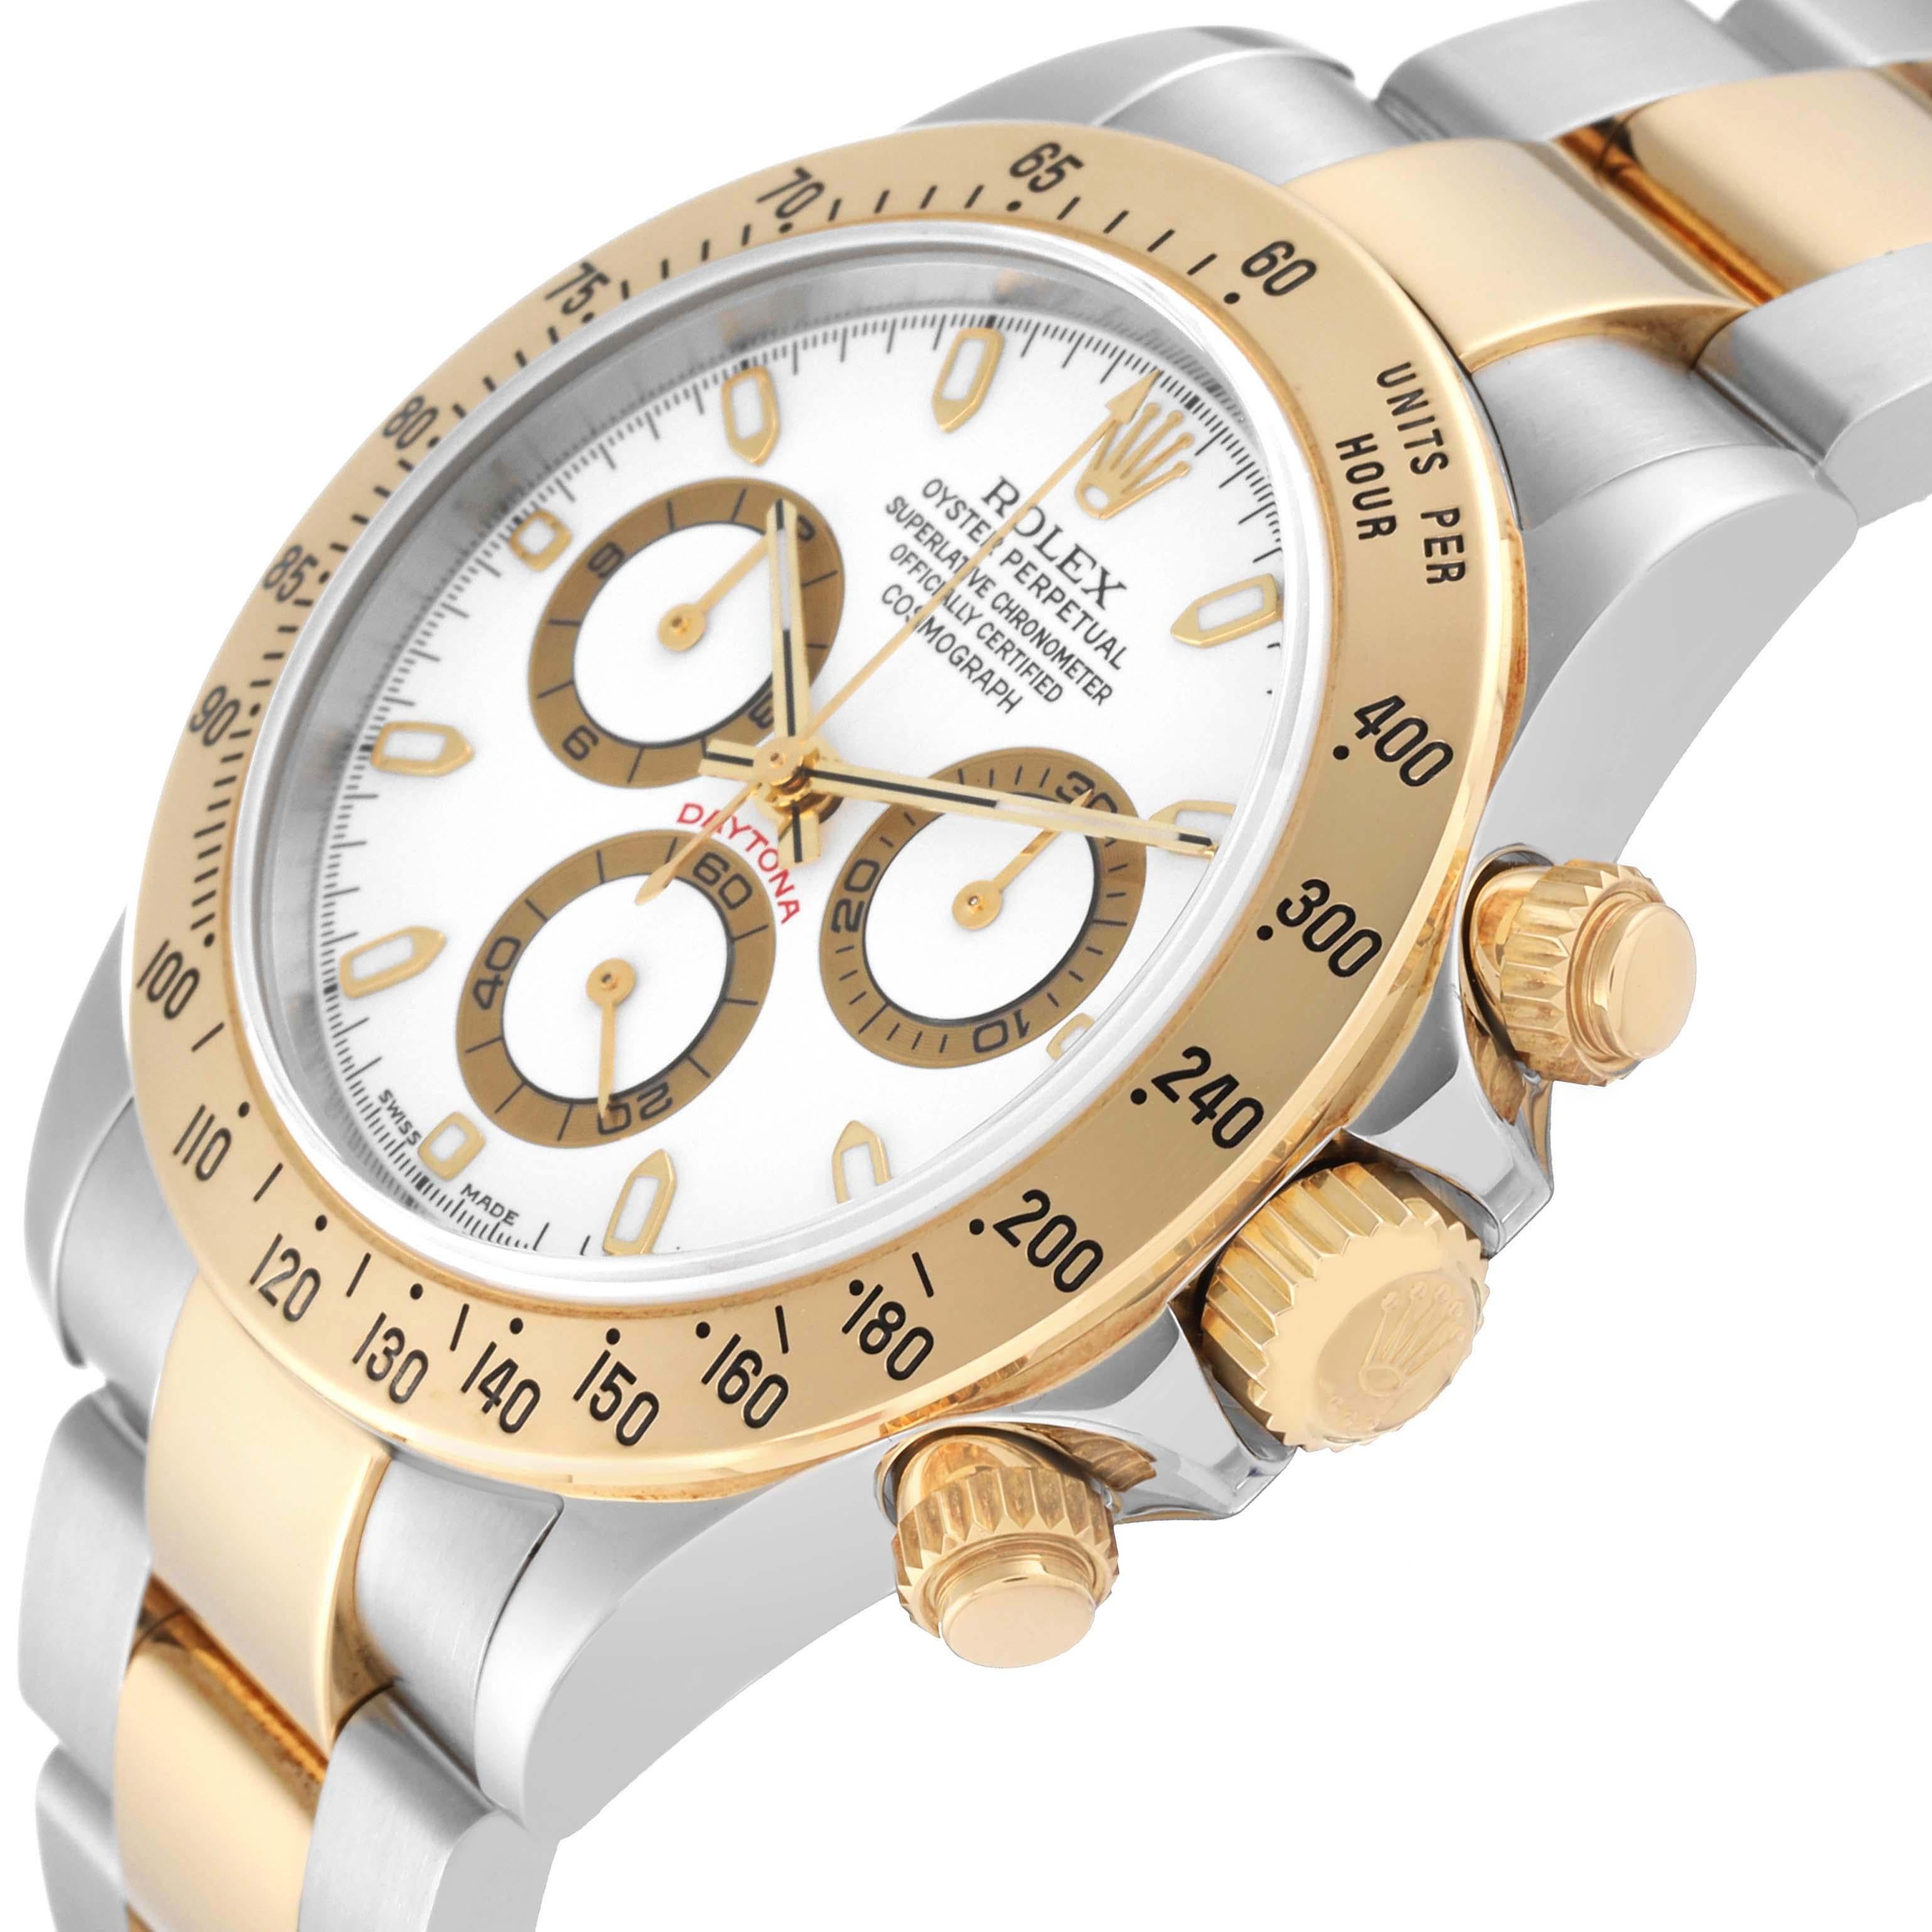 Rolex Daytona Steel Yellow Gold White Dial Mens Watch 116523 Box Papers 1